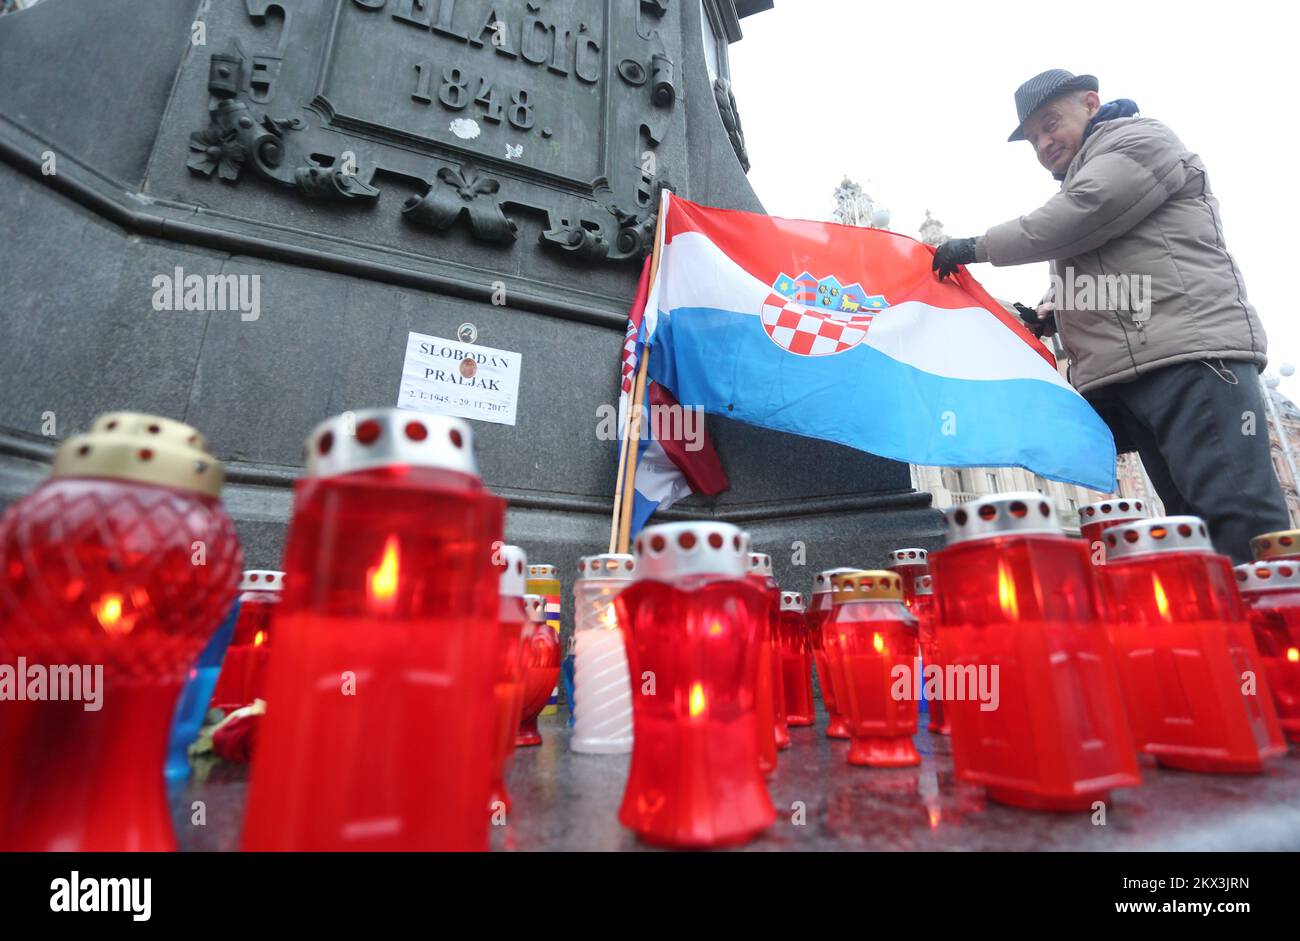 30.11.2017., Zagreb, Croatia - Members of GO! - the Generation of Renewal party lit candles at Ban Jelacic Square and paid tribute to general Slobodan Praljak, who died after appearing to drink poison at court in The Hague as UN judges upheld his 20-year sentence. Photo: Sanjin Strukic/PIXSELL Stock Photo